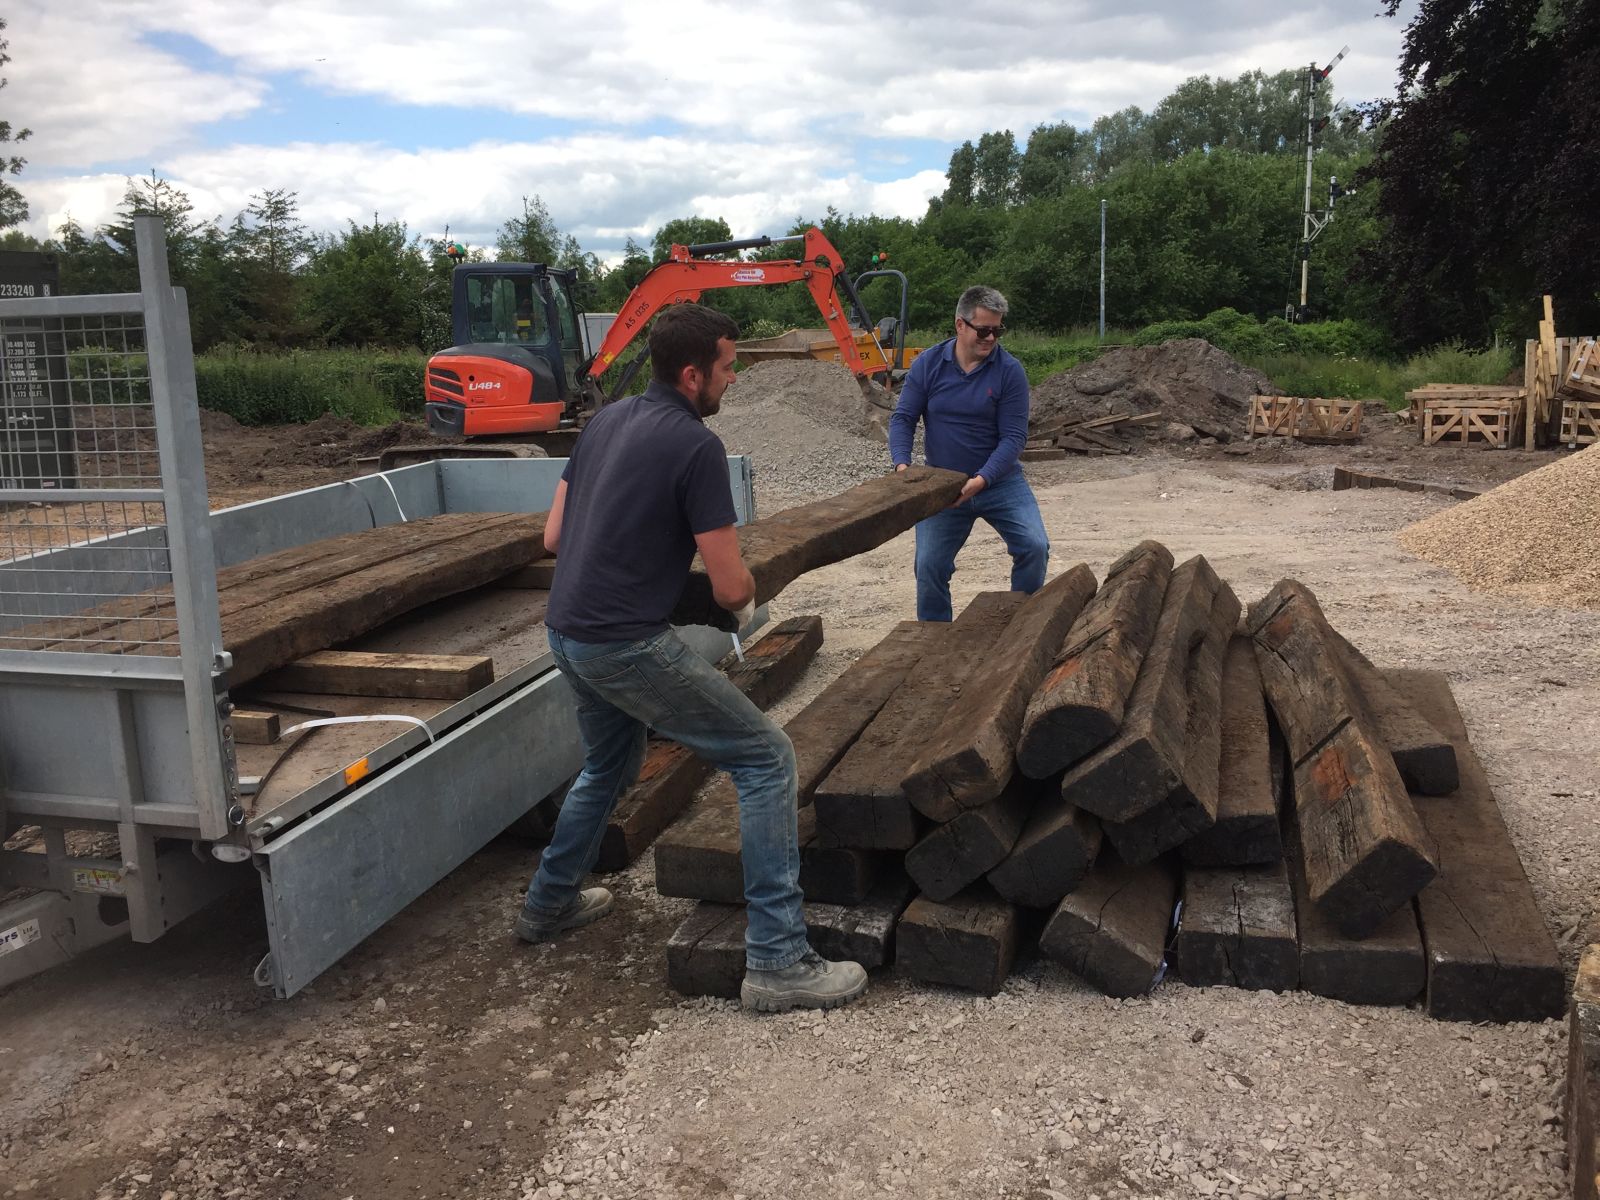 Manually lifting old heavy railway sleepers off a trailer can be tough work! Railwaysleepers.com